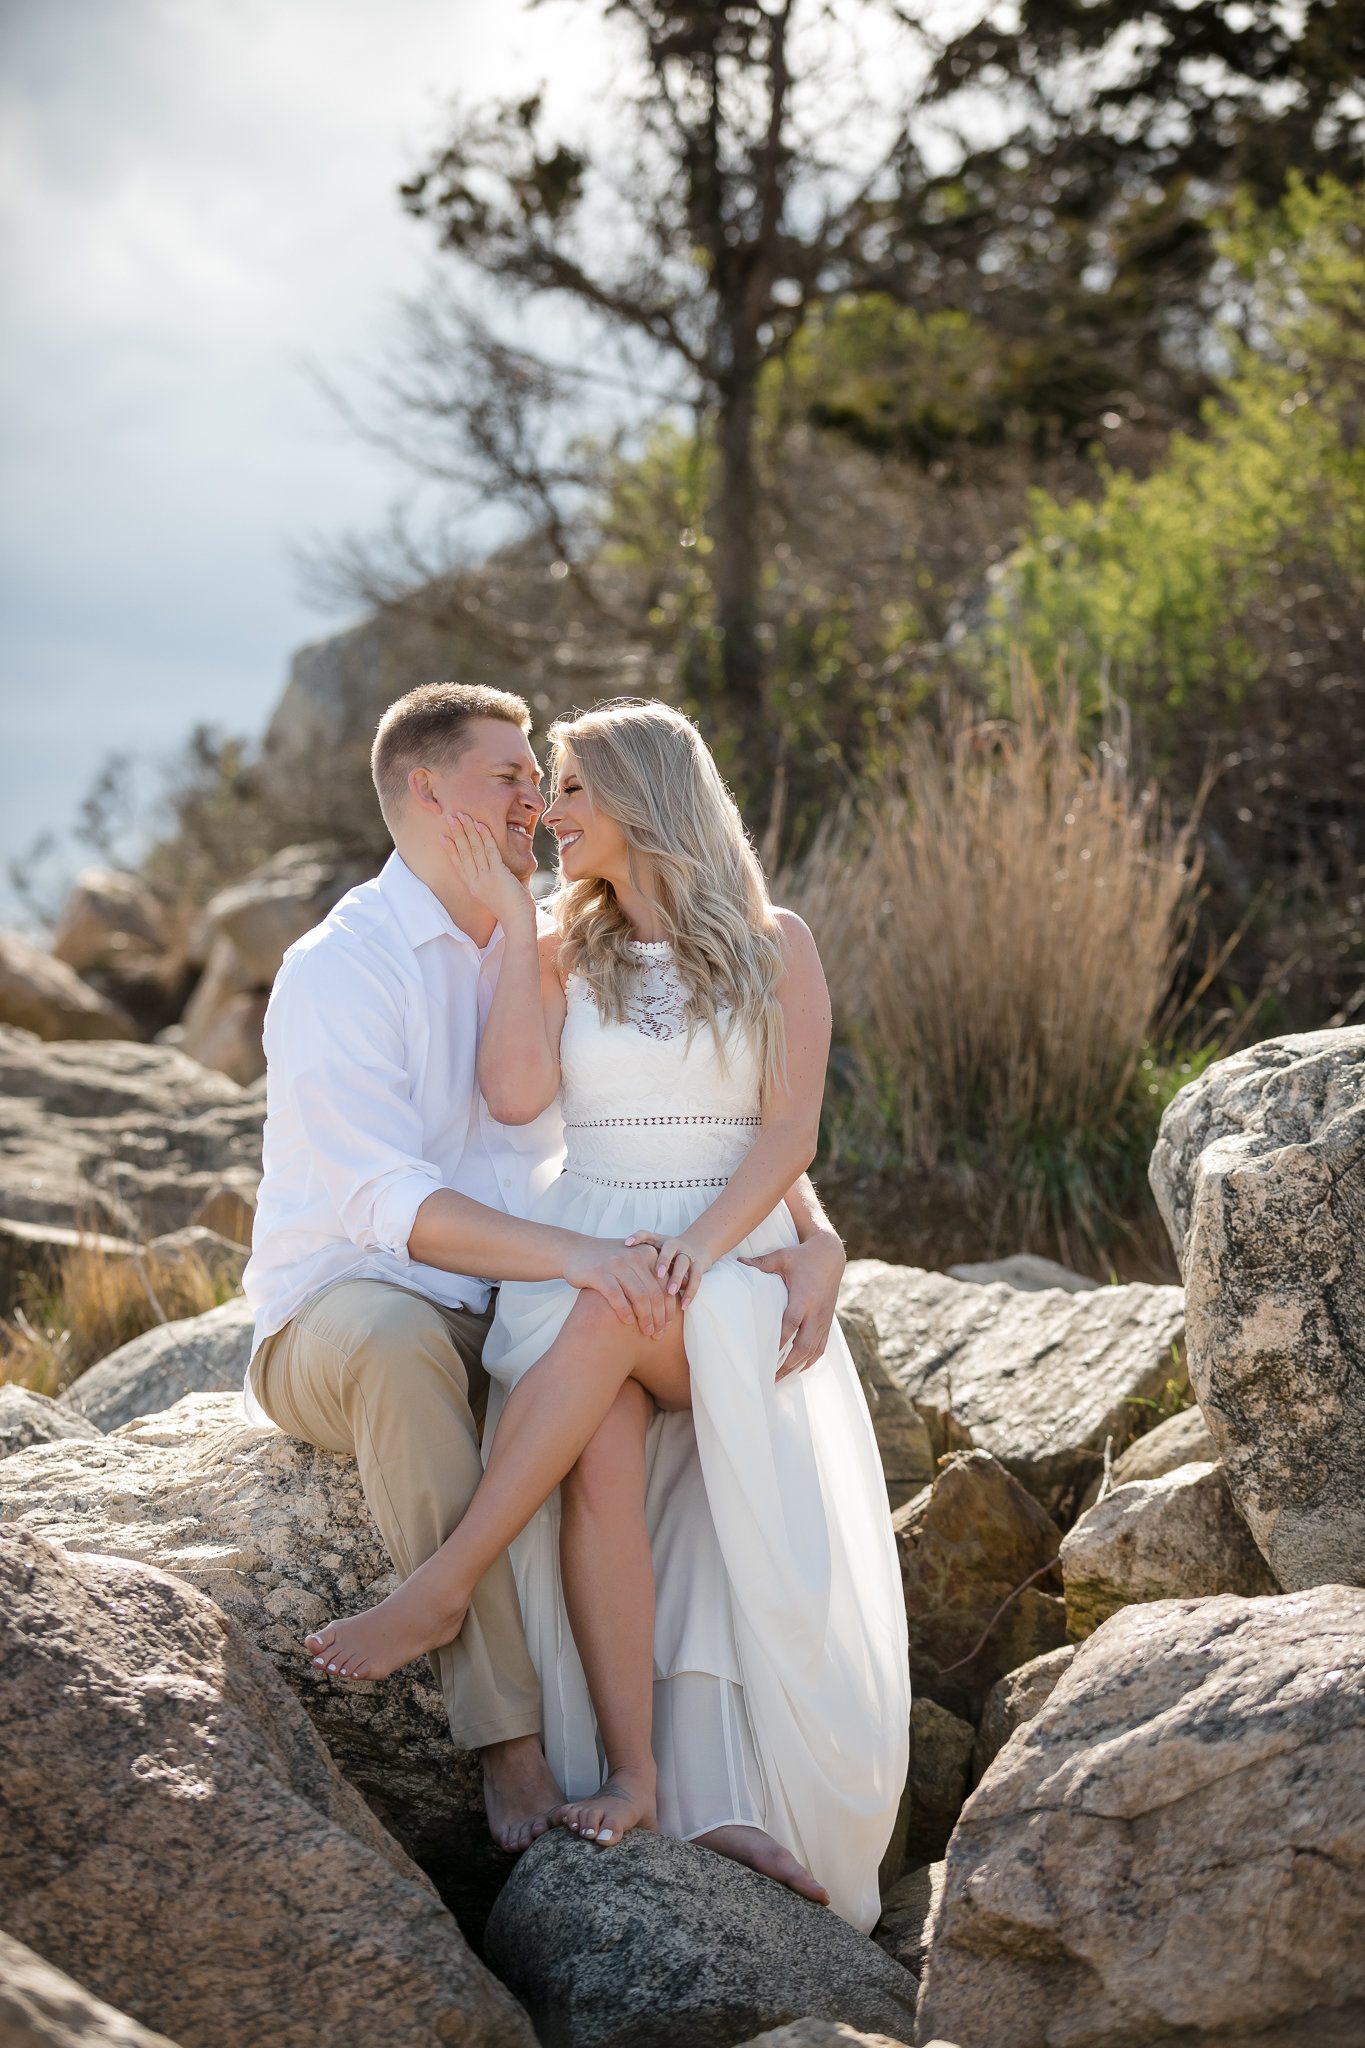 Hammonasset Beach engagement session in Connecticut by Jamerlyn Brown Photography